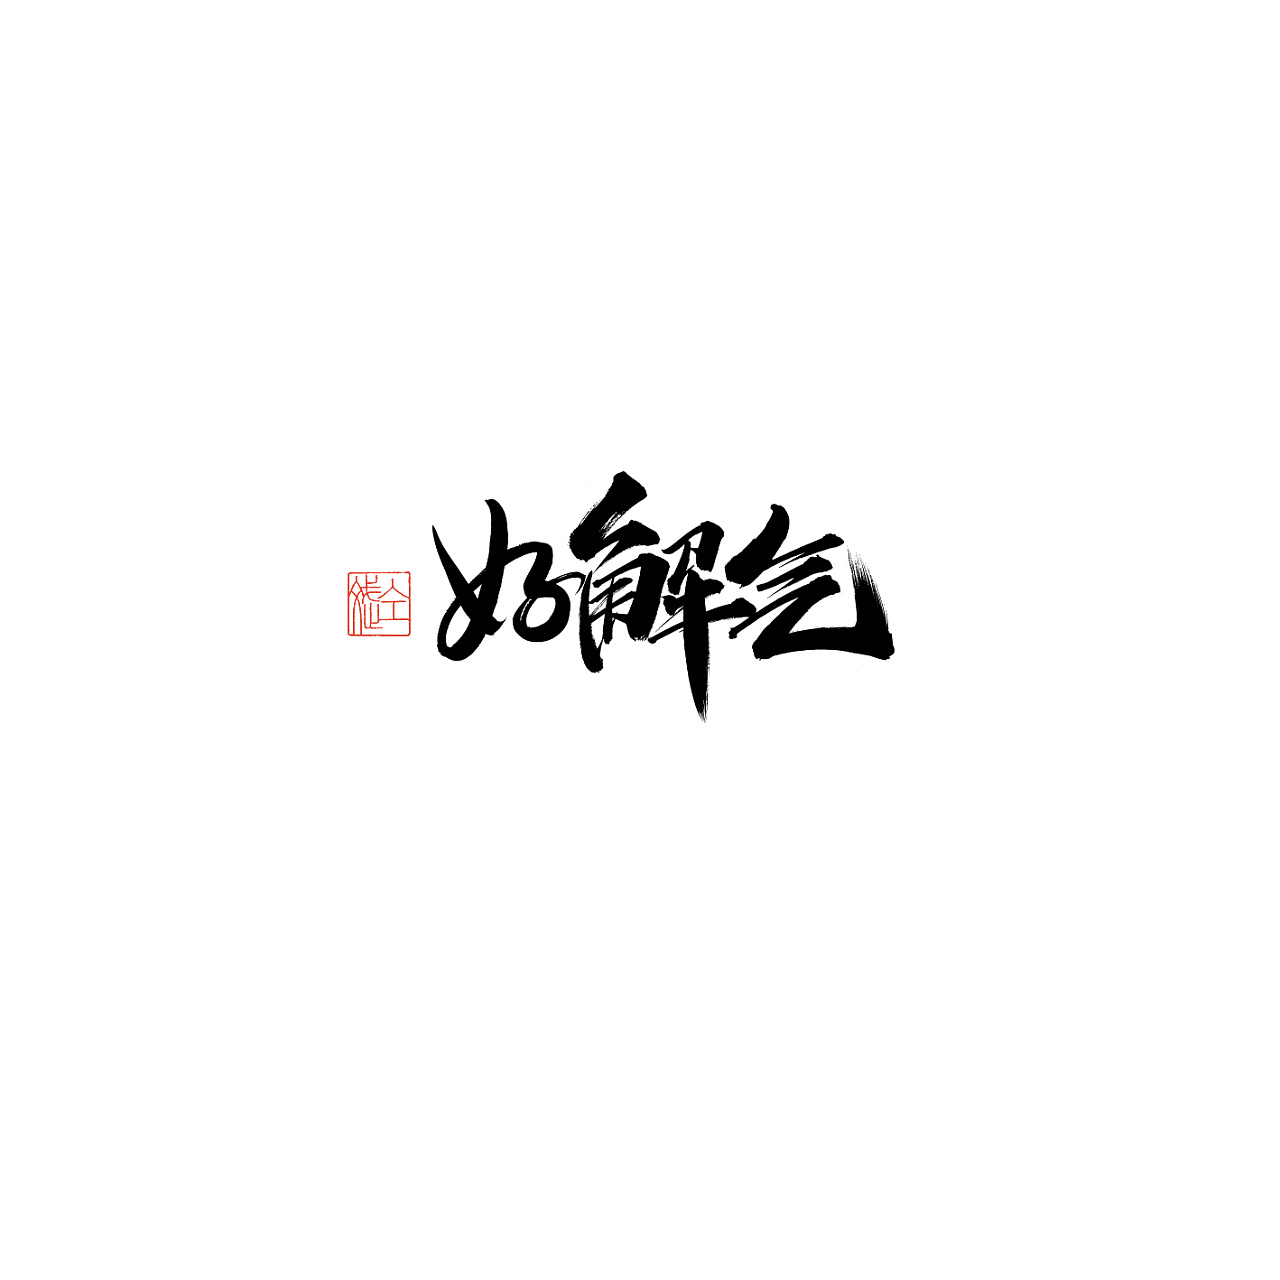 Chinese Creative Font Design-Write in fragments of time and live a good life.